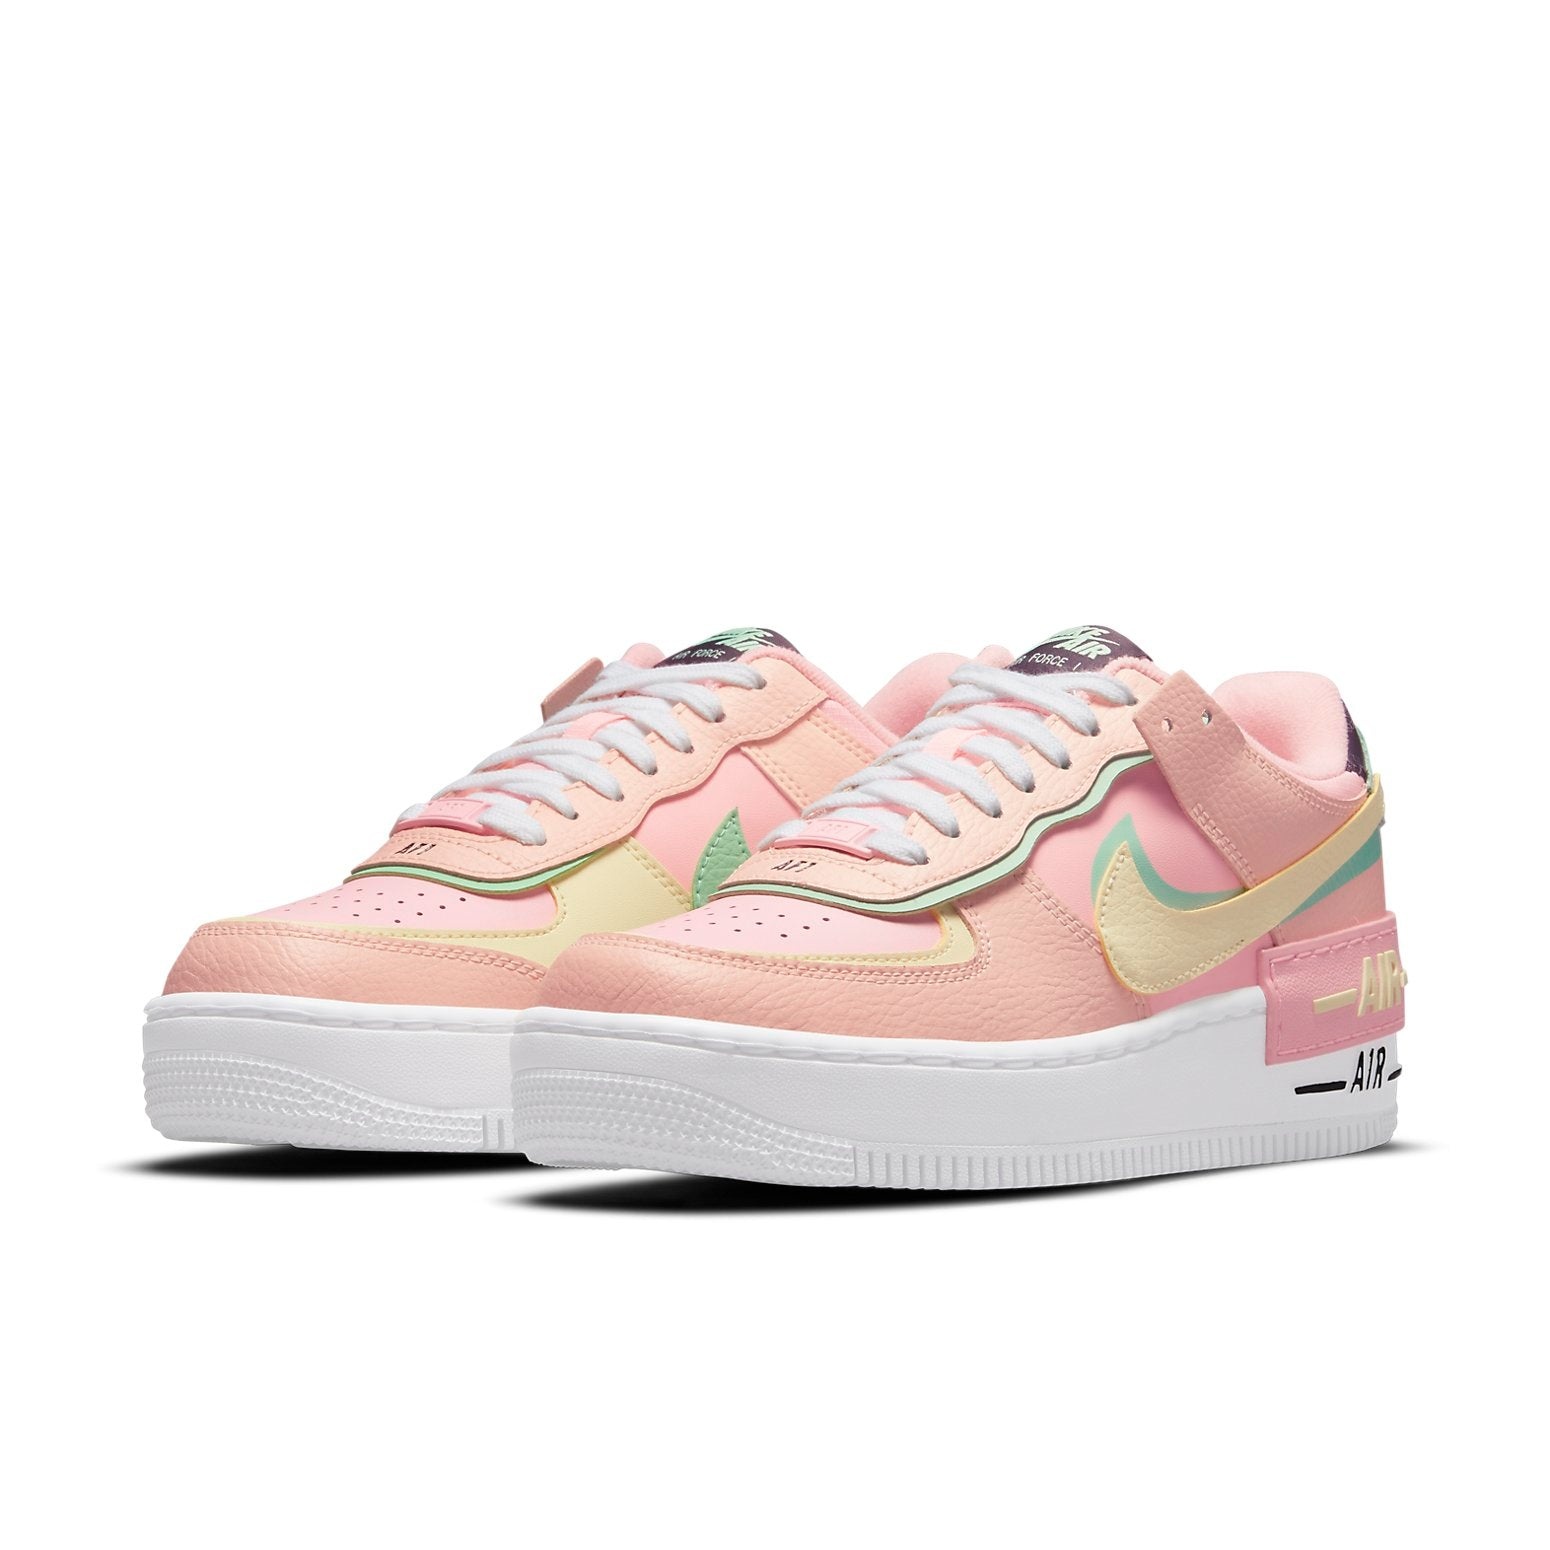 (WMNS) Nike Air Force 1 Shadow 'Arctic Punch Barely Volt' CU8591-601 - 3